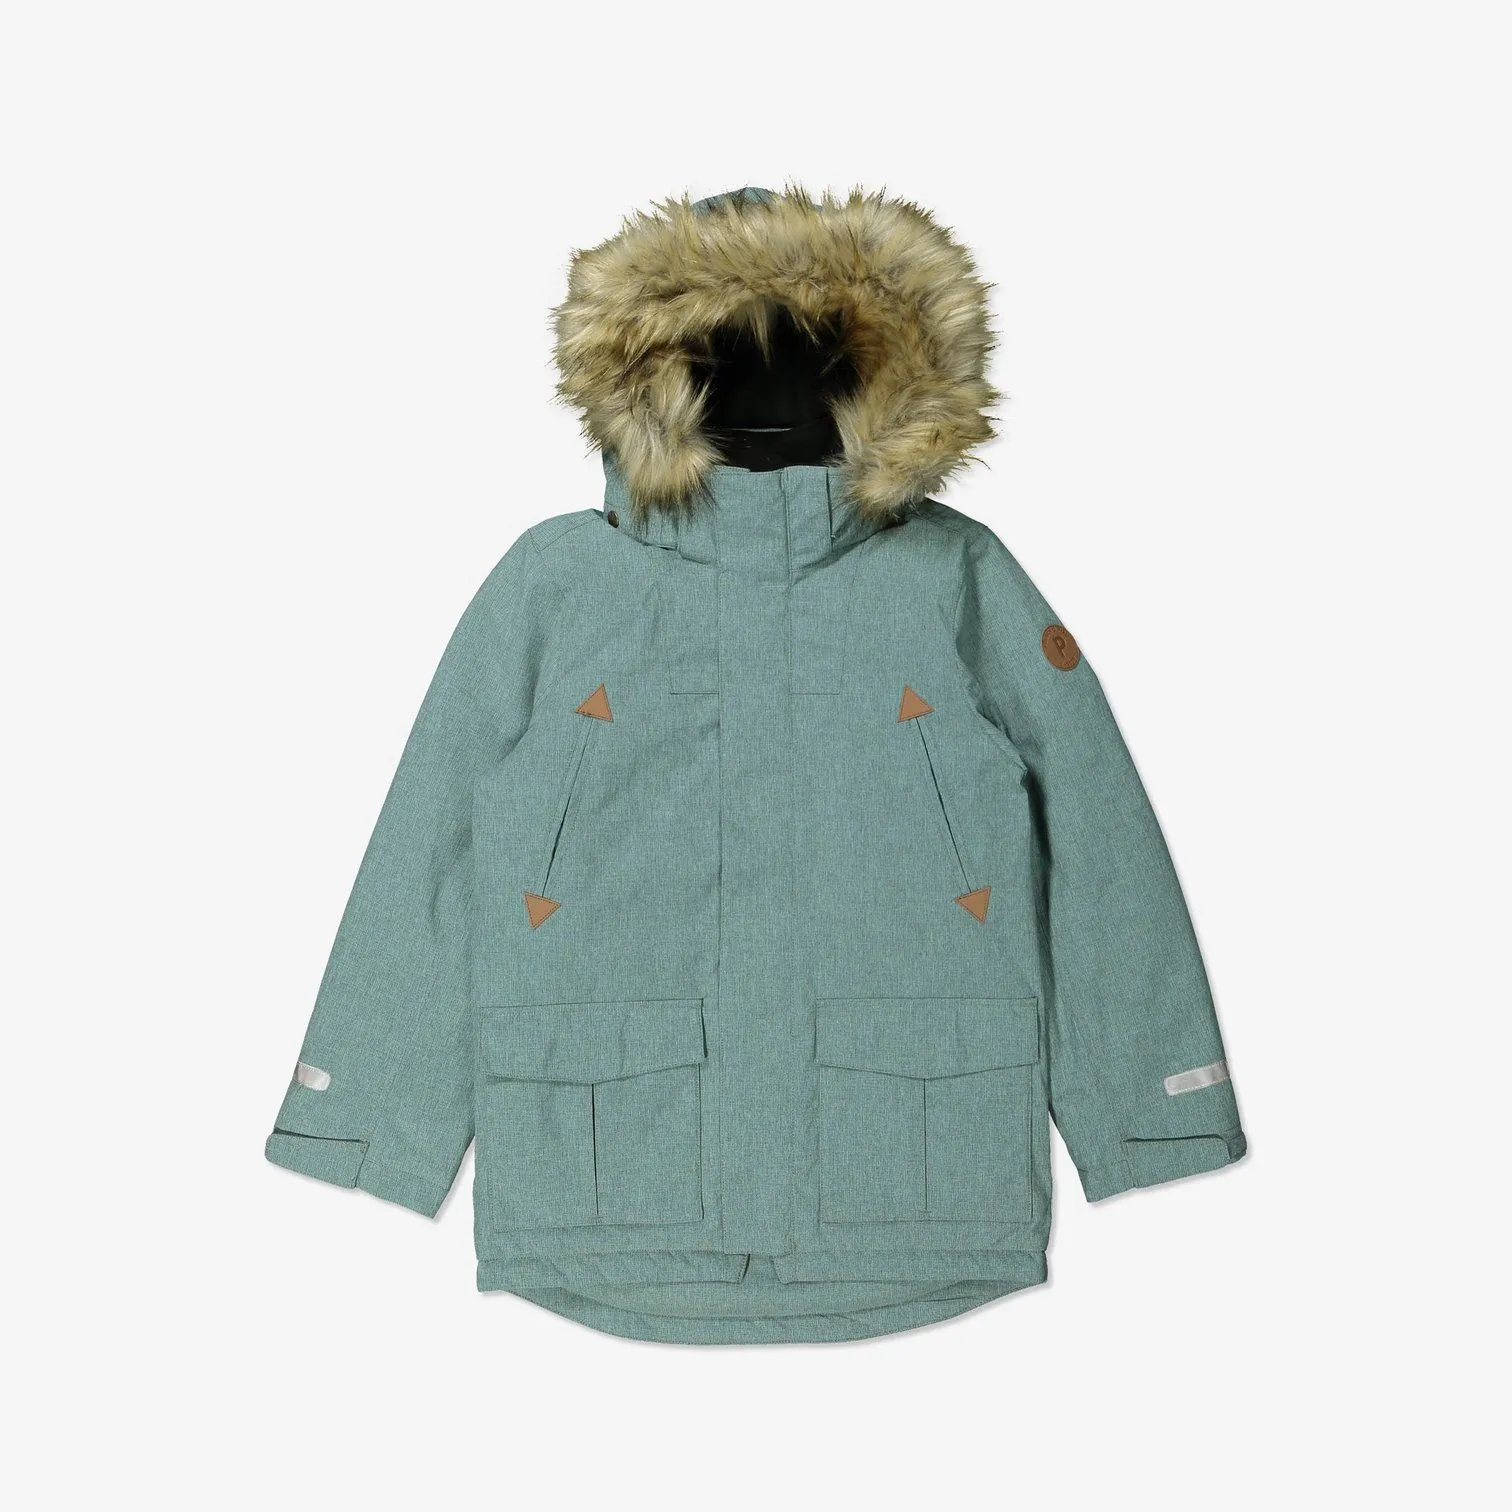 Keep warm during outdoor play in a Kids Padded Parka Coat.